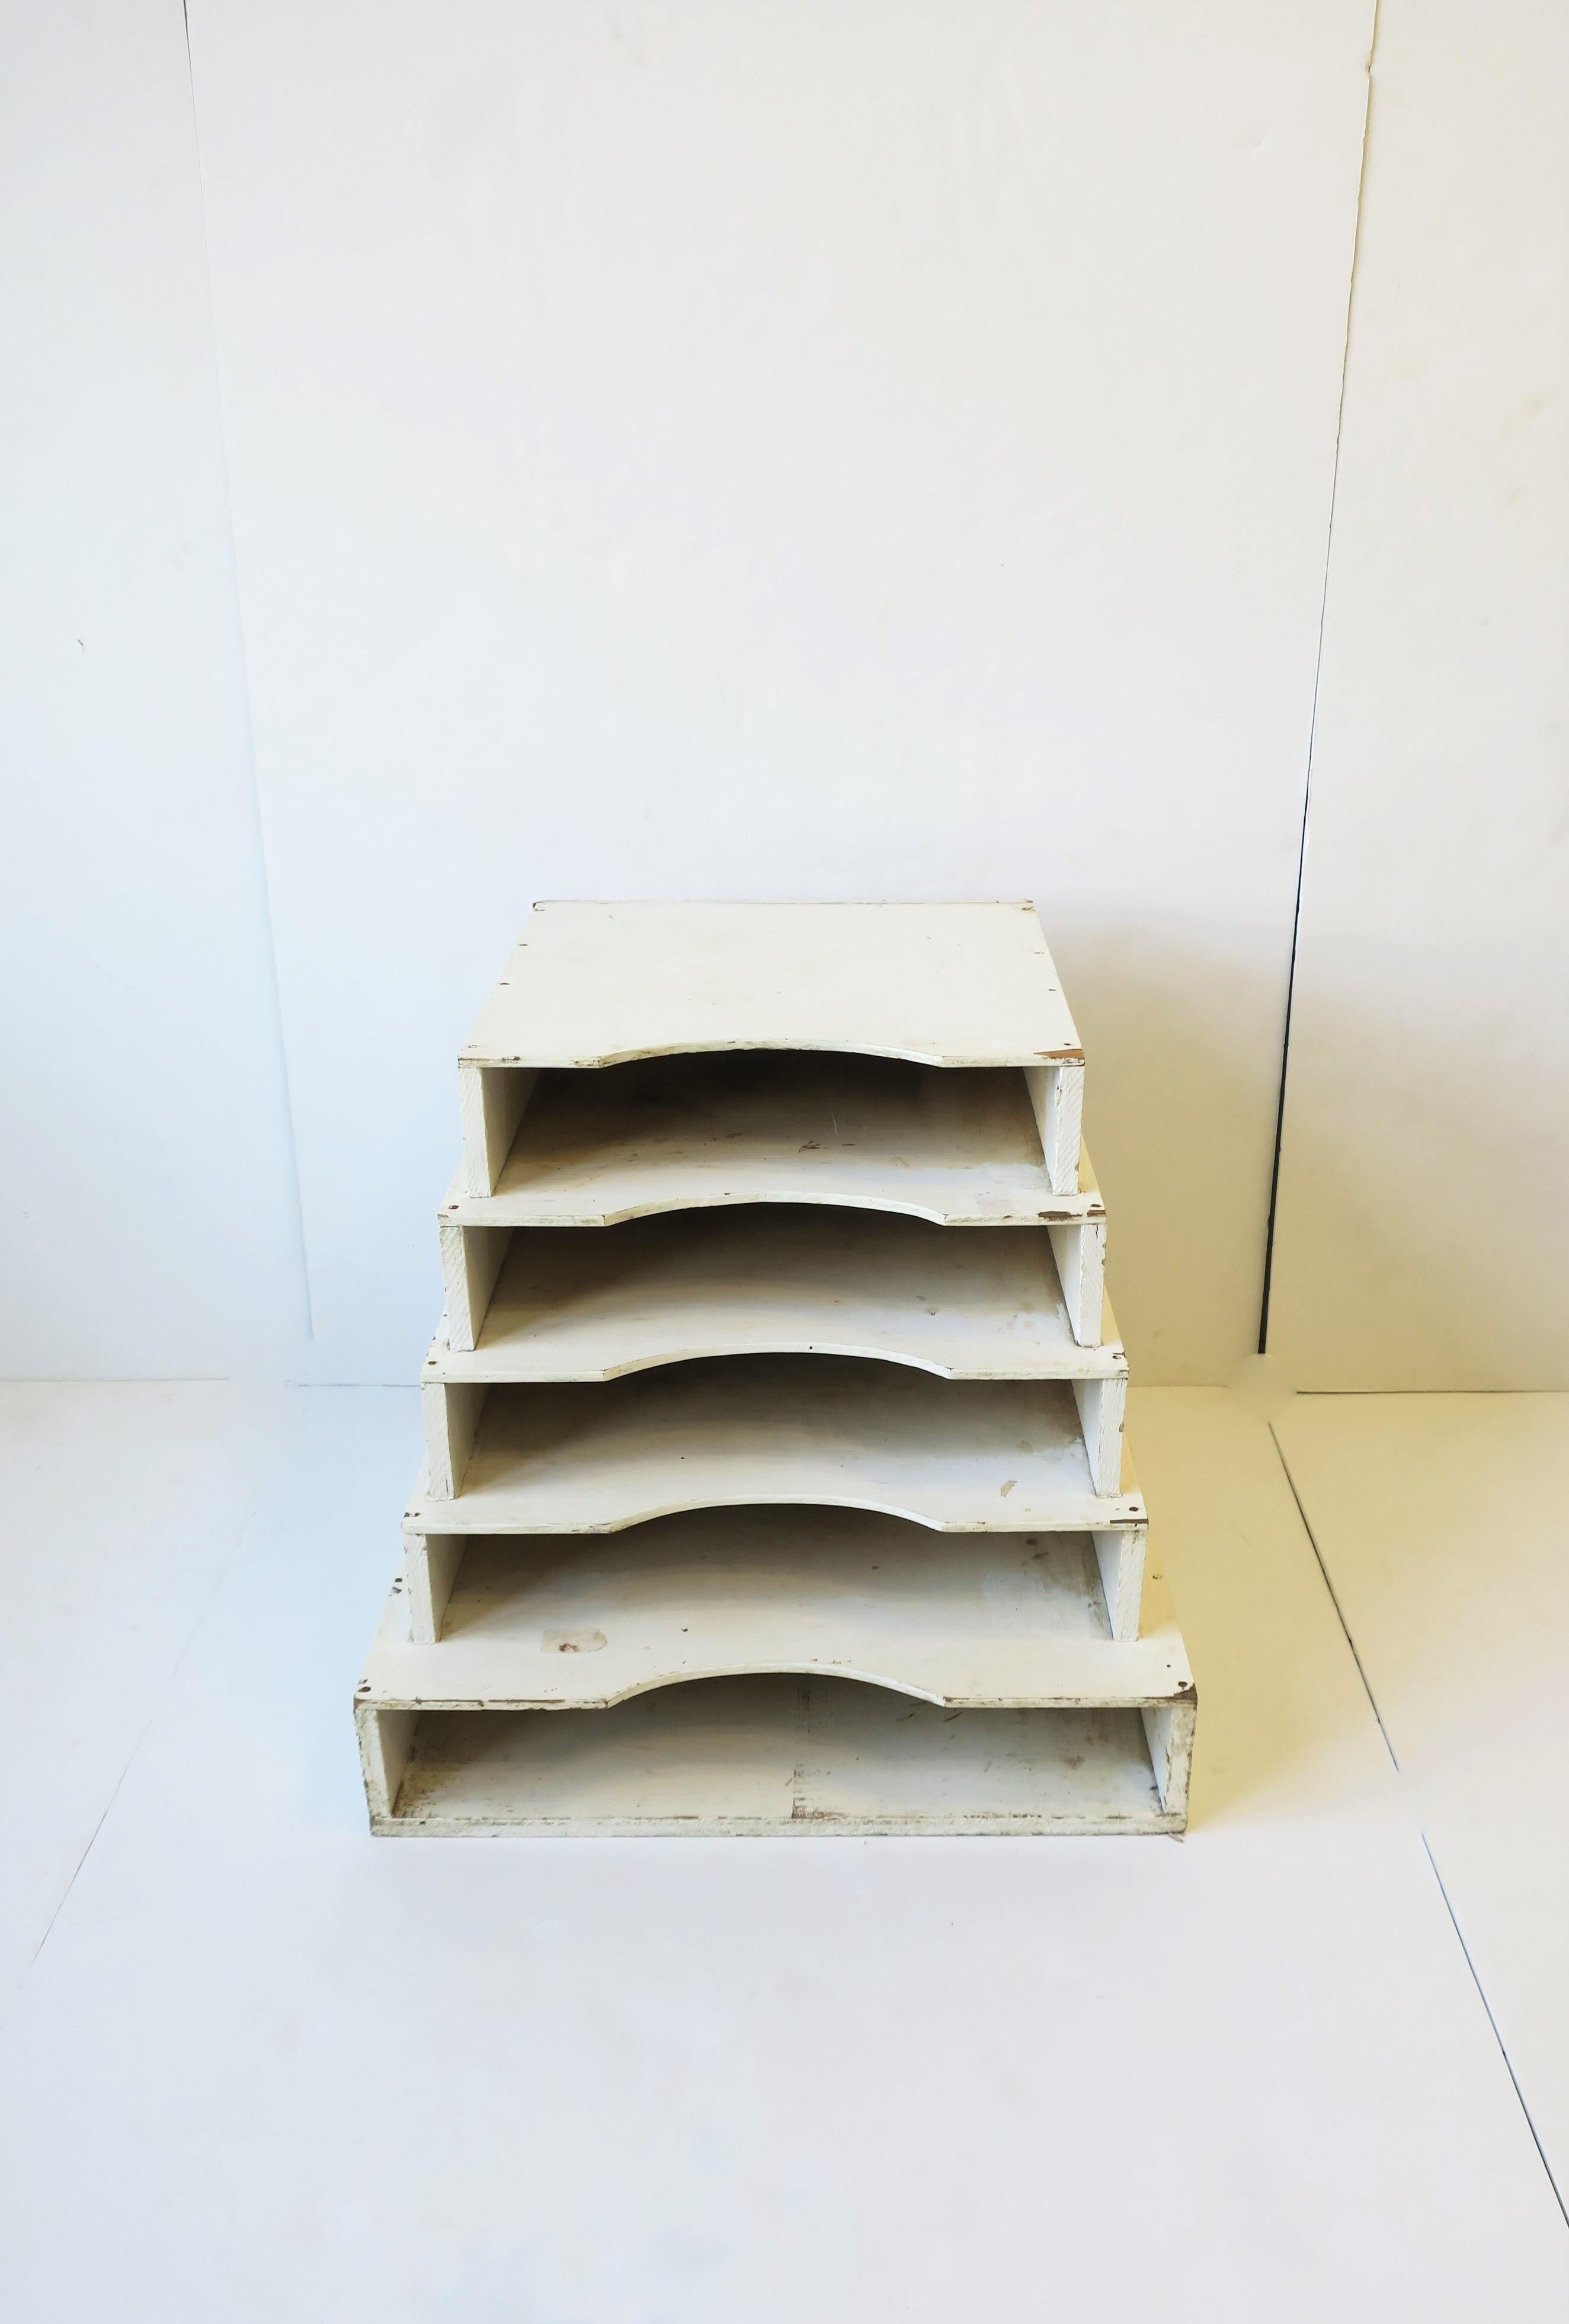 A white wood sandpaper box holder turned industrial table with shelves, circa mid-20th century, 1950s, 1960s, USA. Piece is tapered, hand-painted white wood, originally designed to hold sheets of sandpaper in a carpenter's workshop. Today, piece can